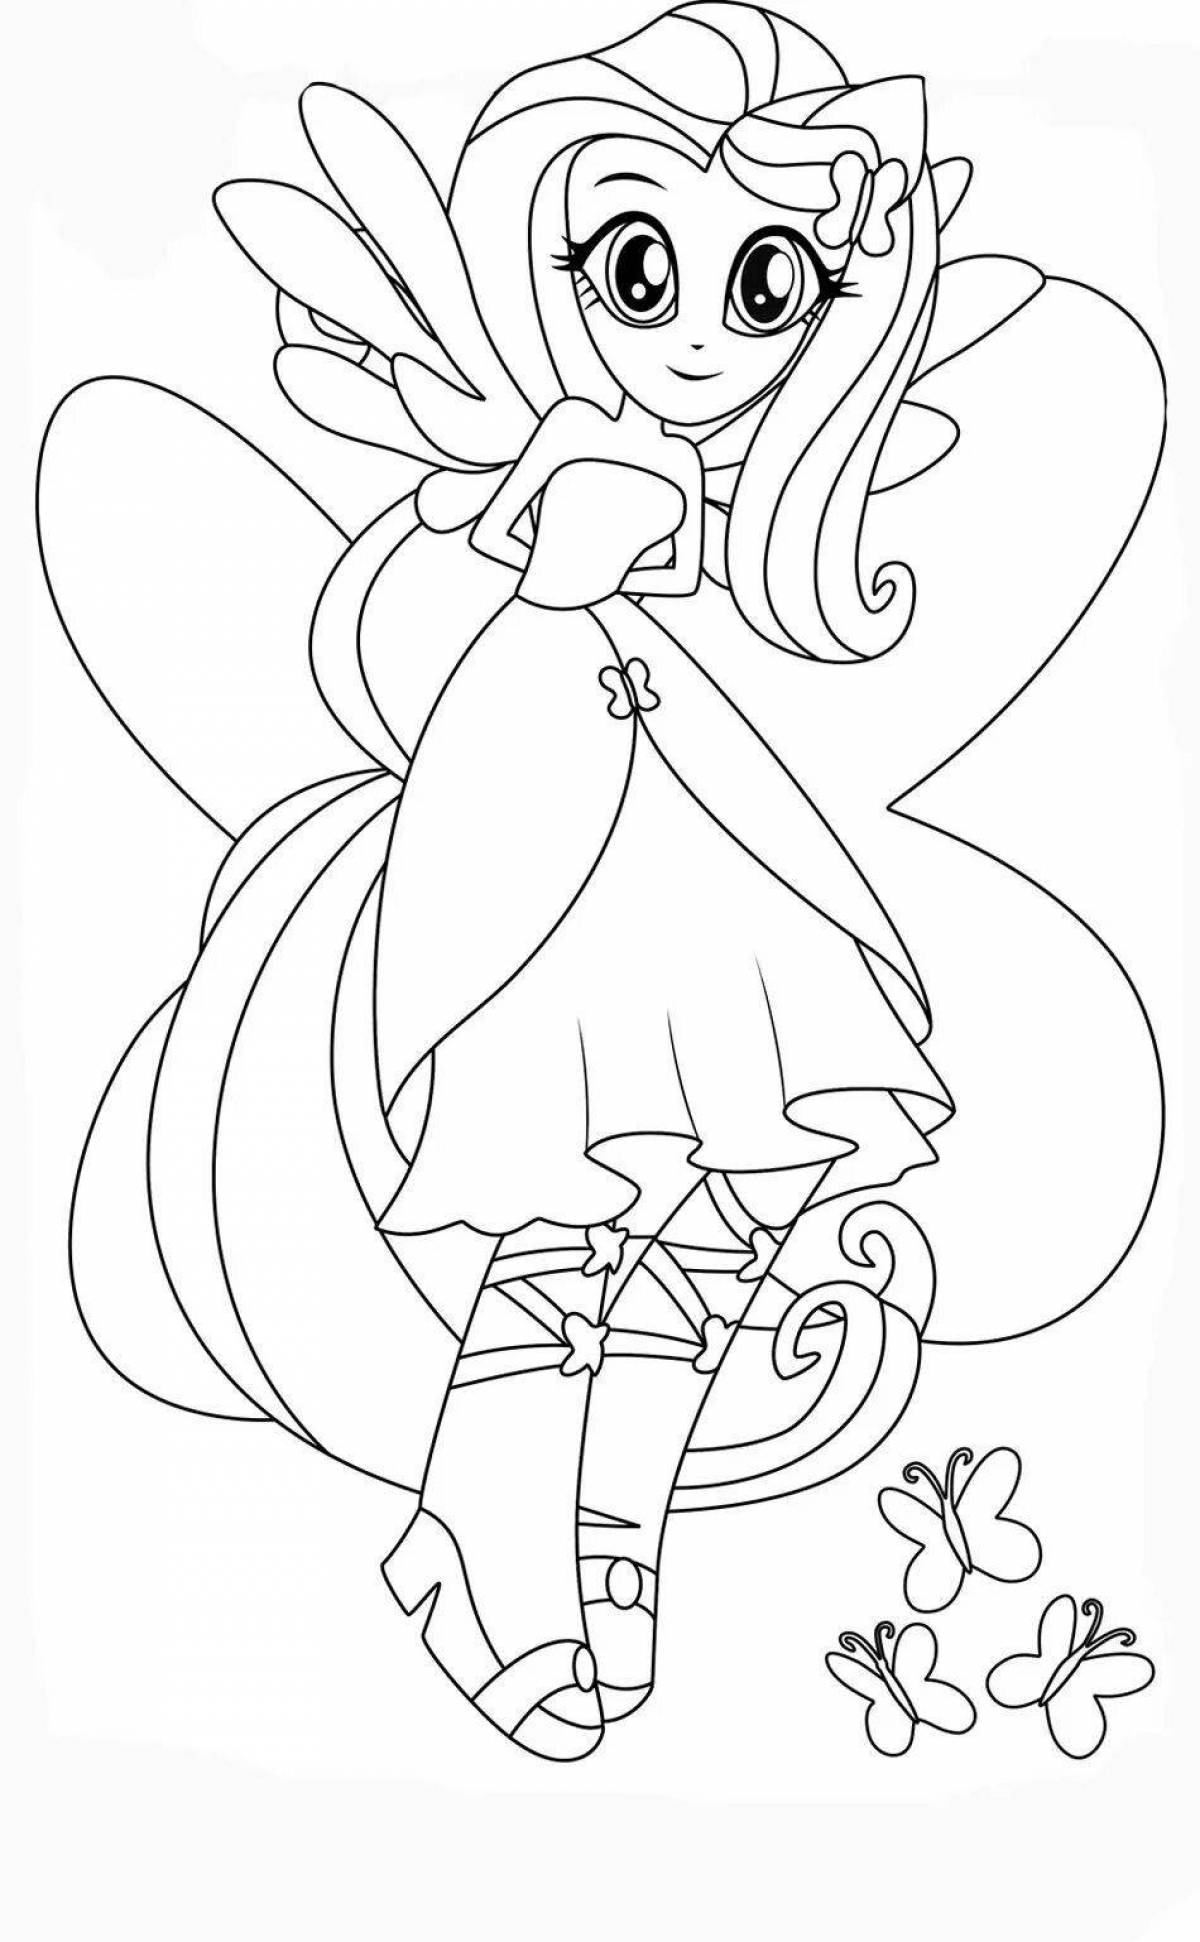 Crazy little pony girls coloring pages